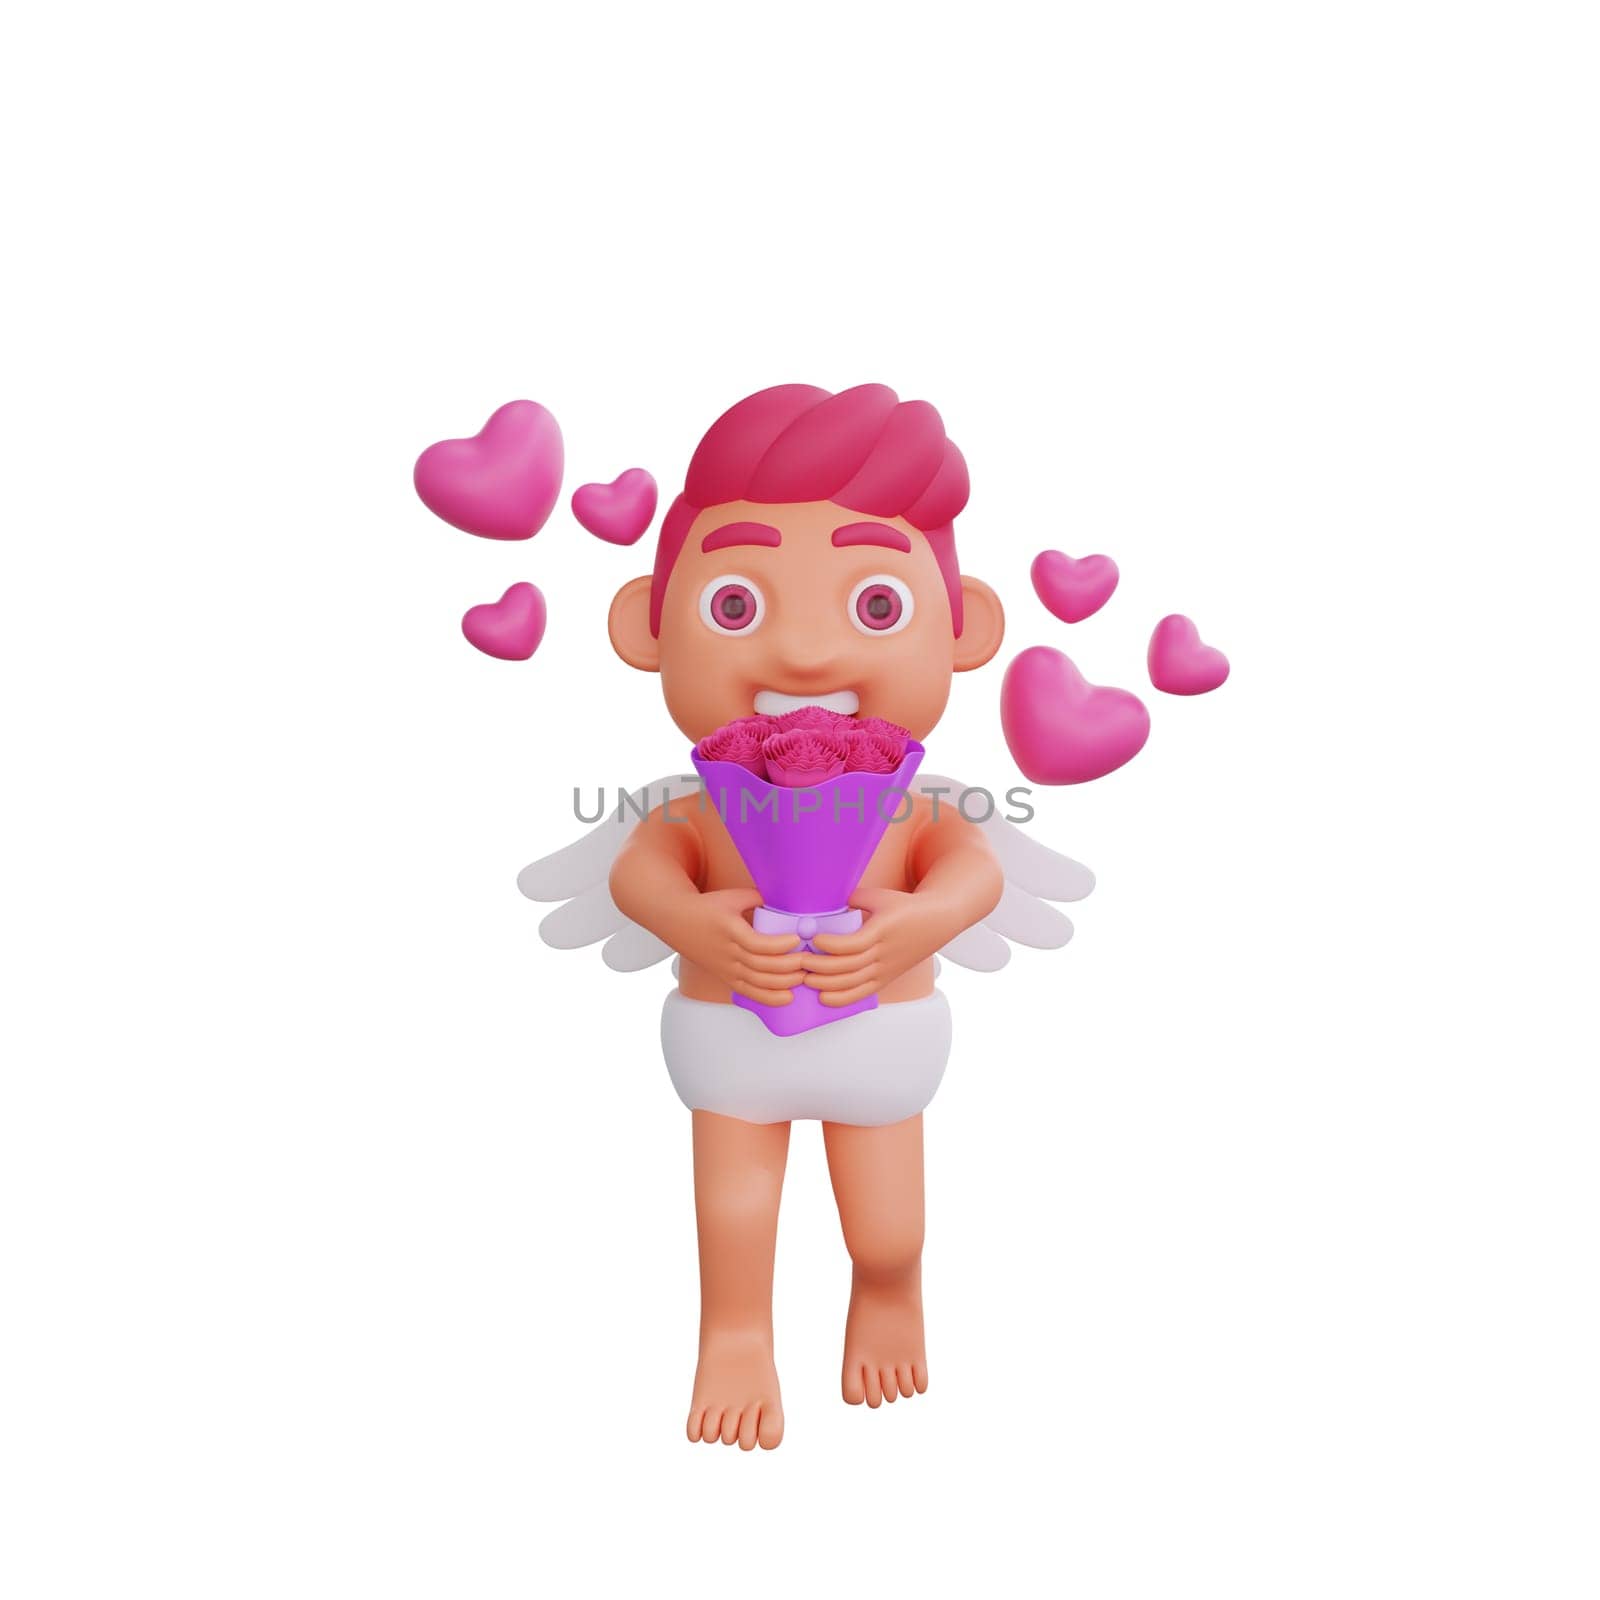 3D illustration of Valentine Cupid character holding a bouquet of roses by Rahmat_Djayusman